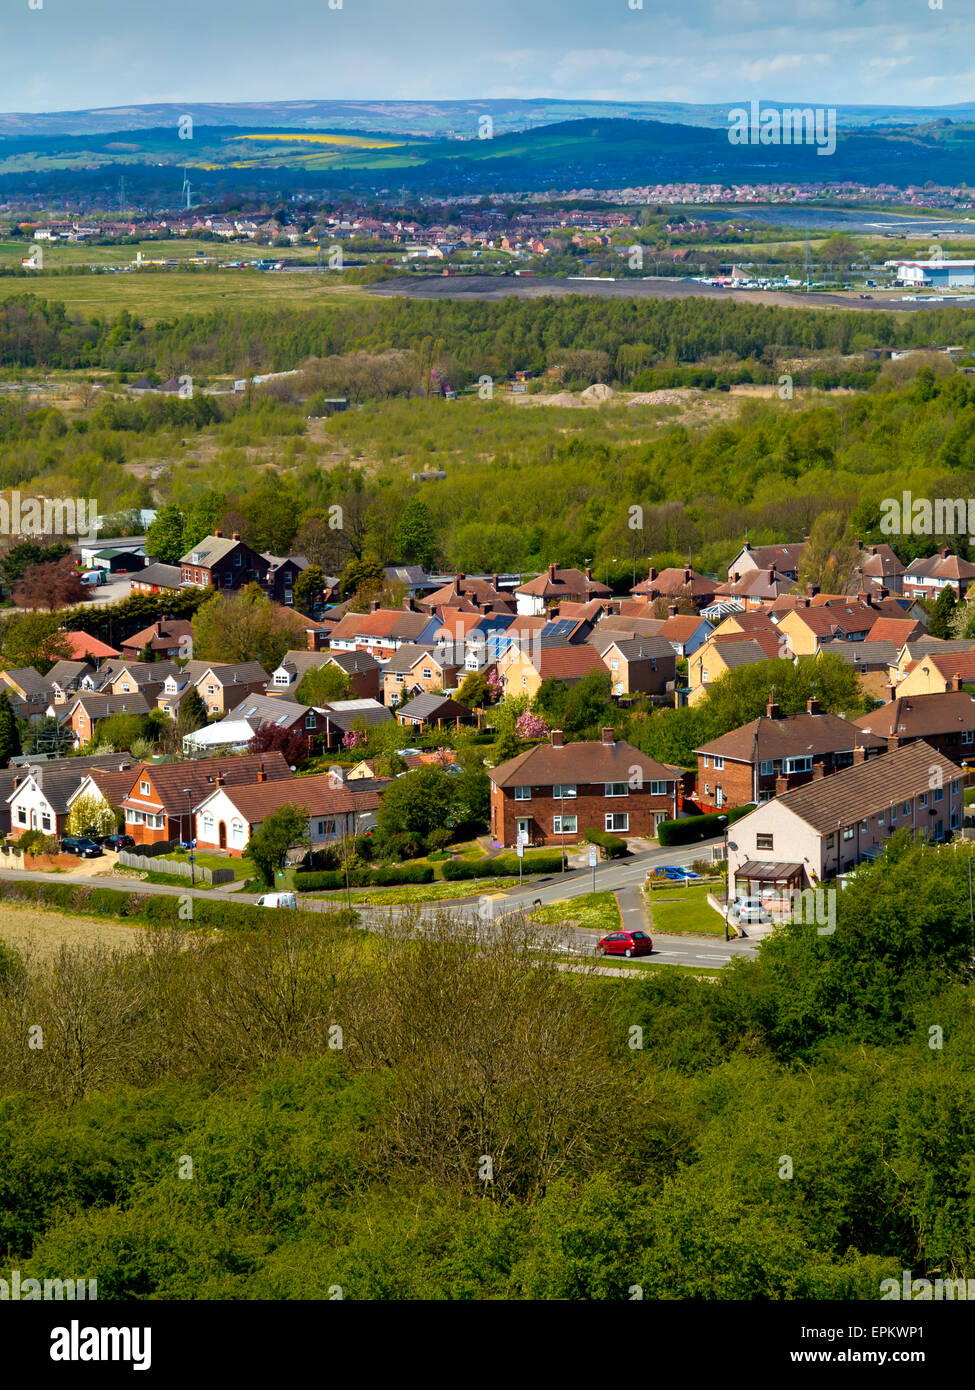 View looking down on houses in  Bolsover a former mining town in North East Derbyshire England UK Stock Photo